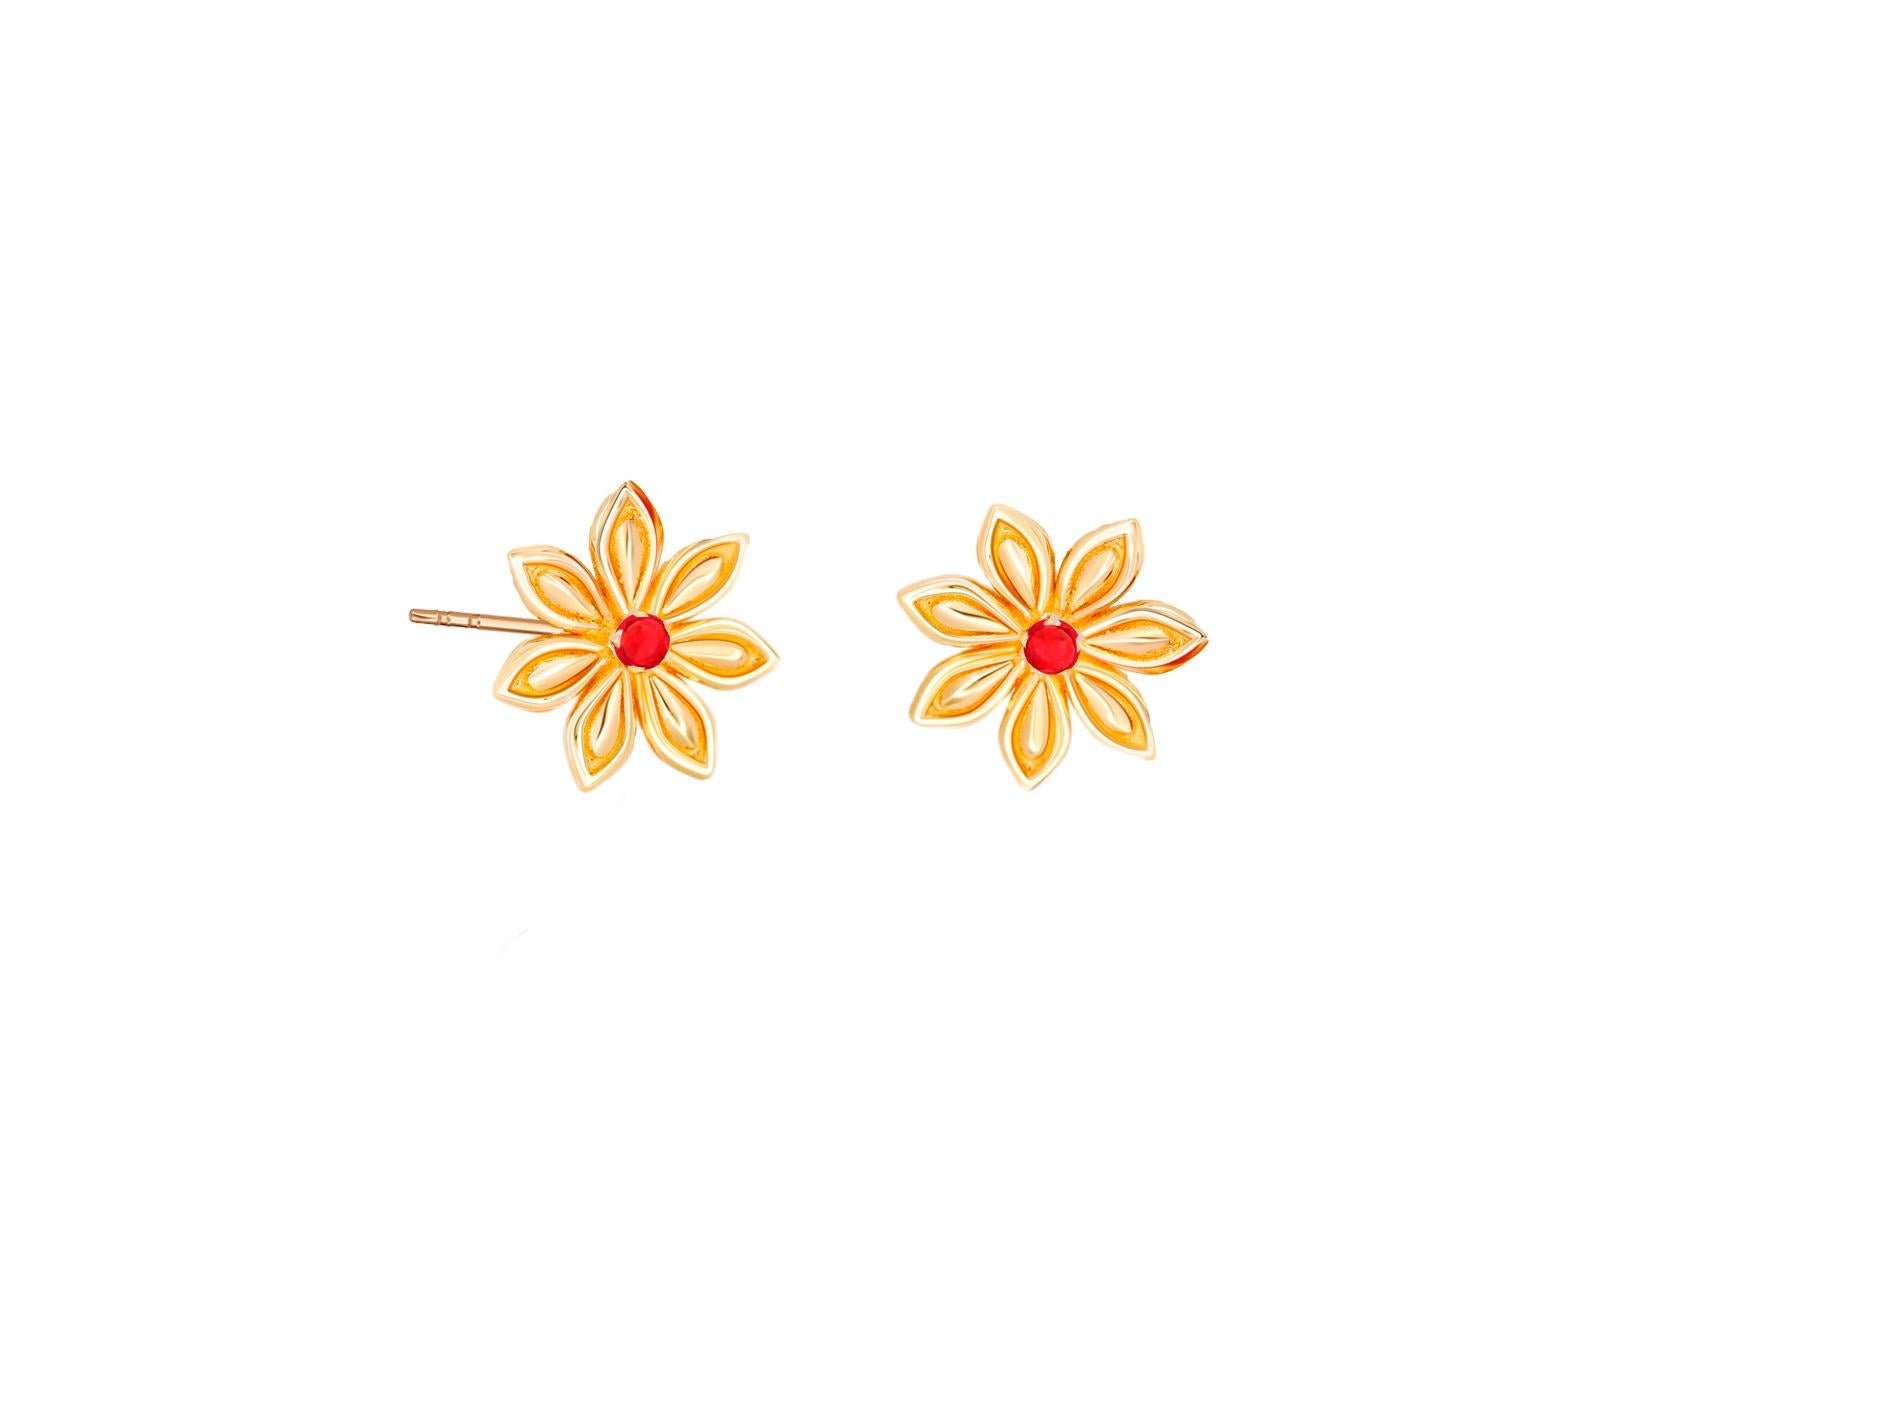 Round Cut Star Anise Flower Jewelry set: ring and earrings in 14k gold. For Sale